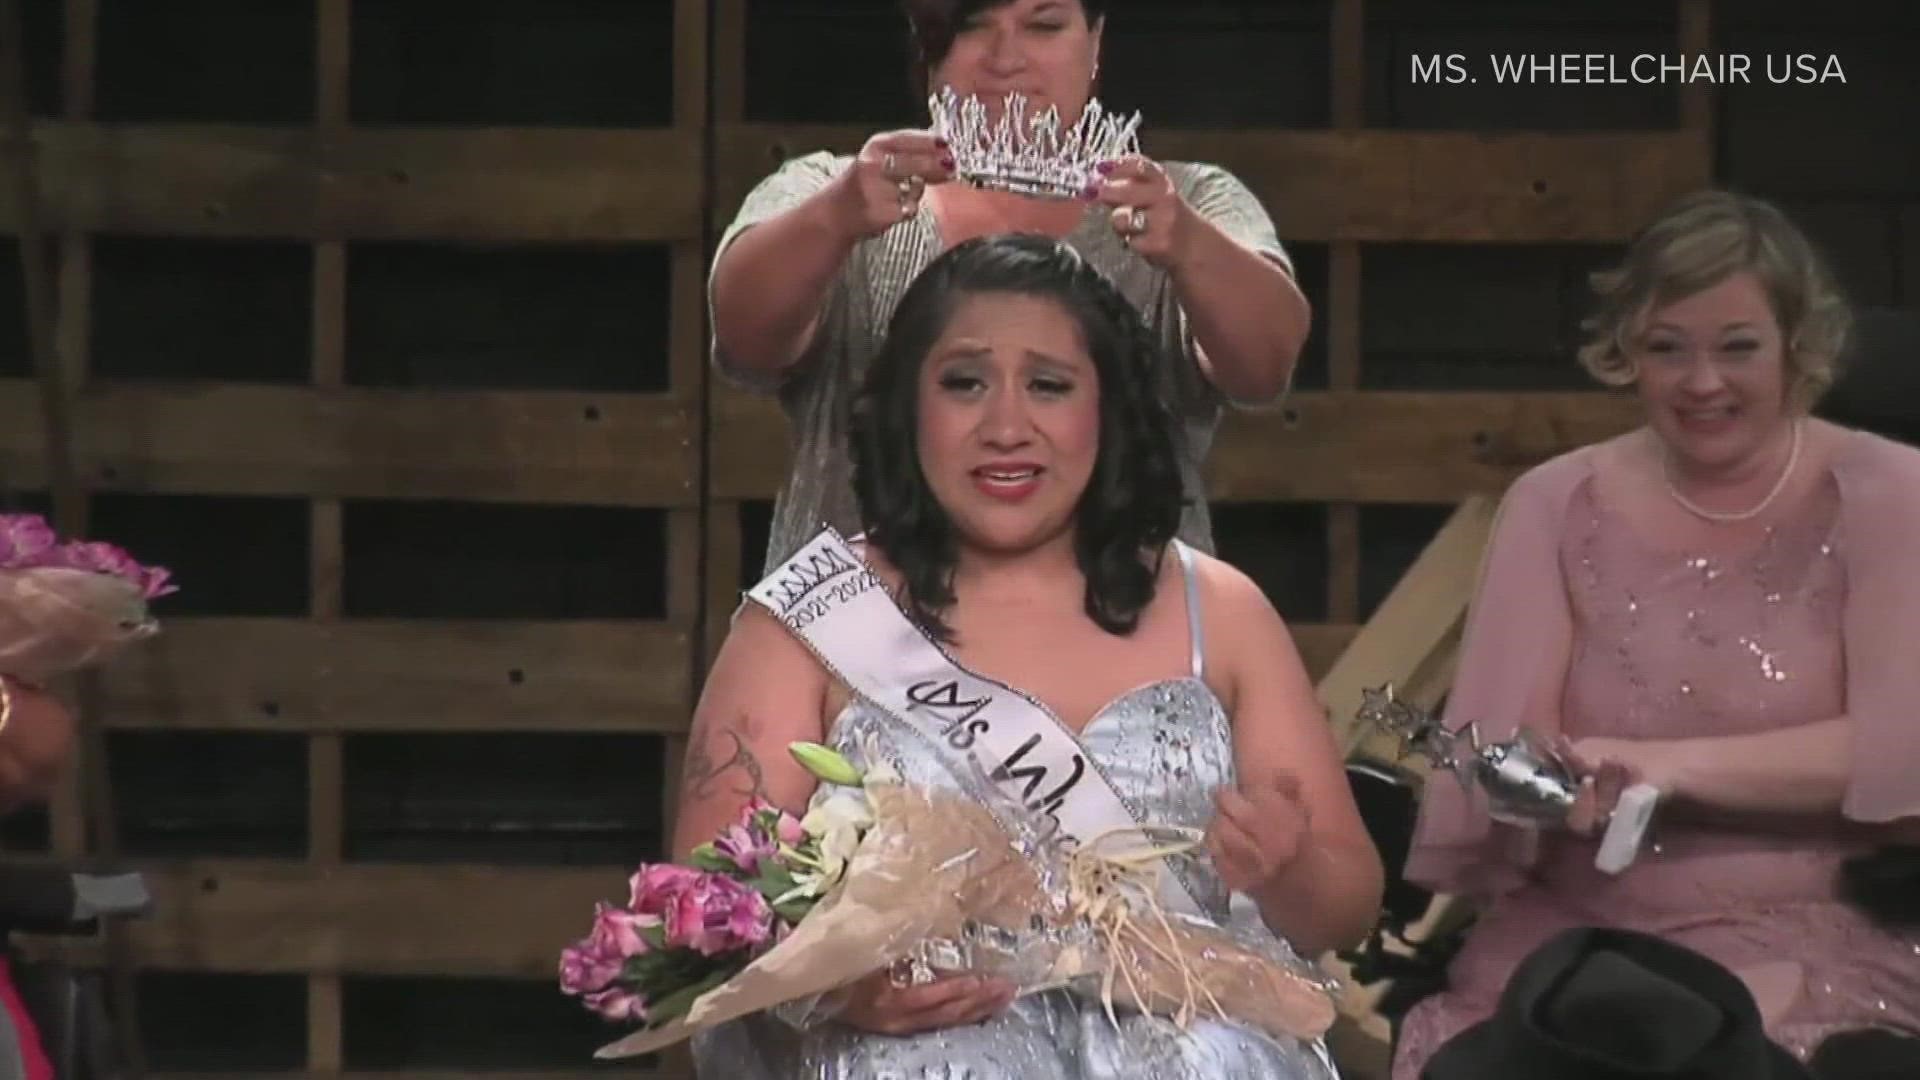 Puyallup's Erica Myron has won the title of "Ms. Wheelchair USA" for 2021. The victim of a shooting, she's using her new platform to help others deal with trauma.